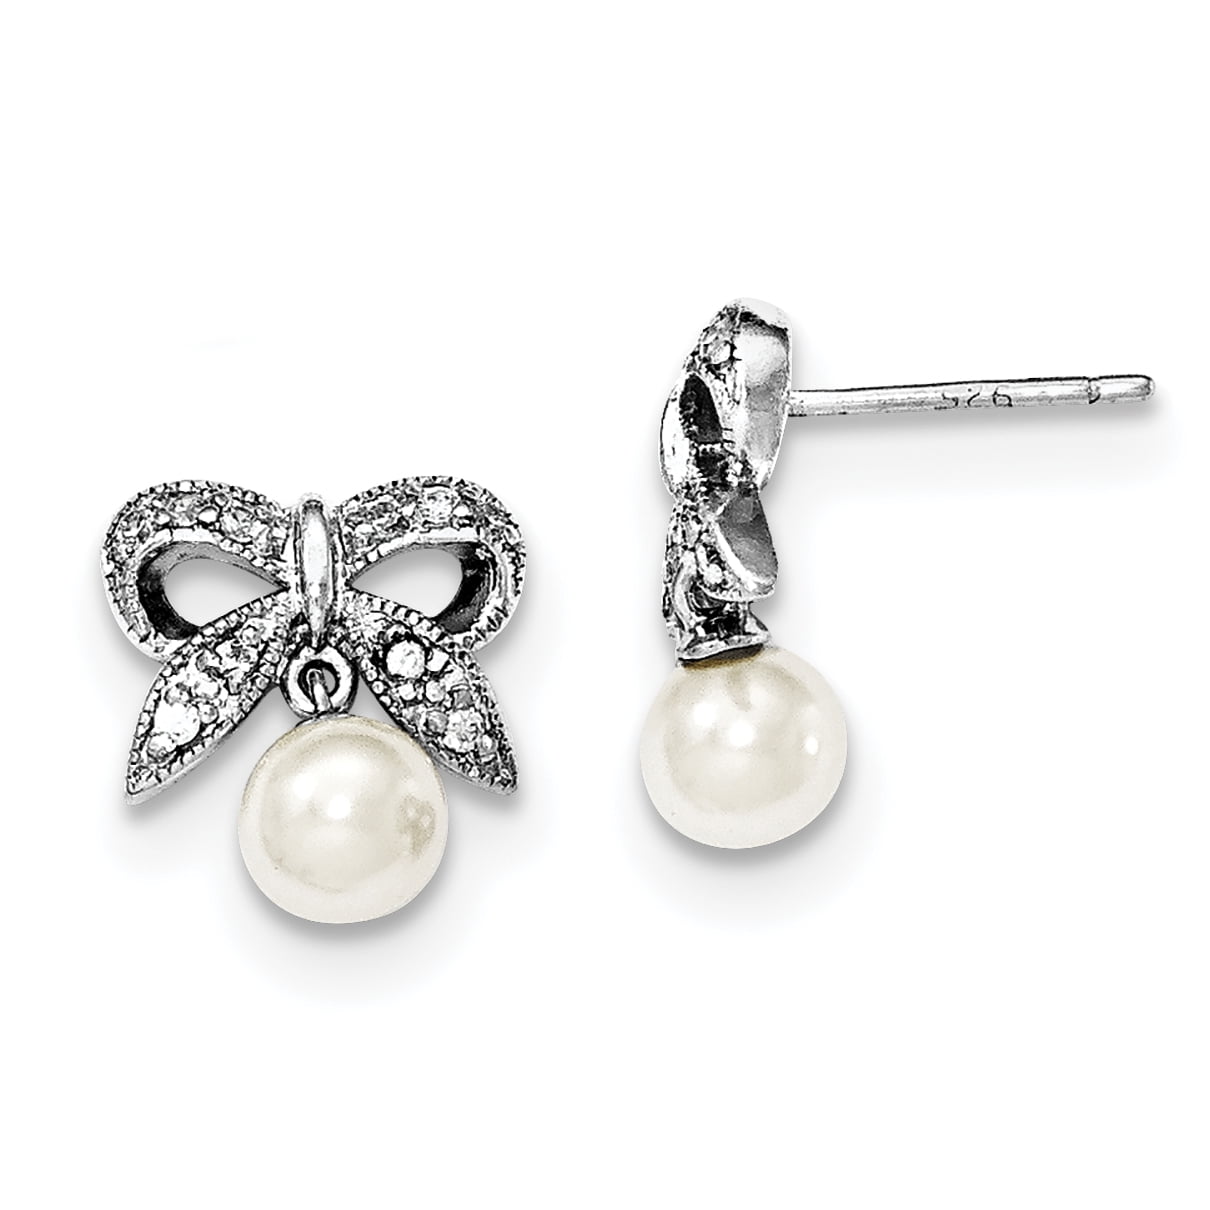 Jewel Tie 925 Sterling Silver 10-11mm White FW Cultured Round Simulated Pearl Stud Earrings